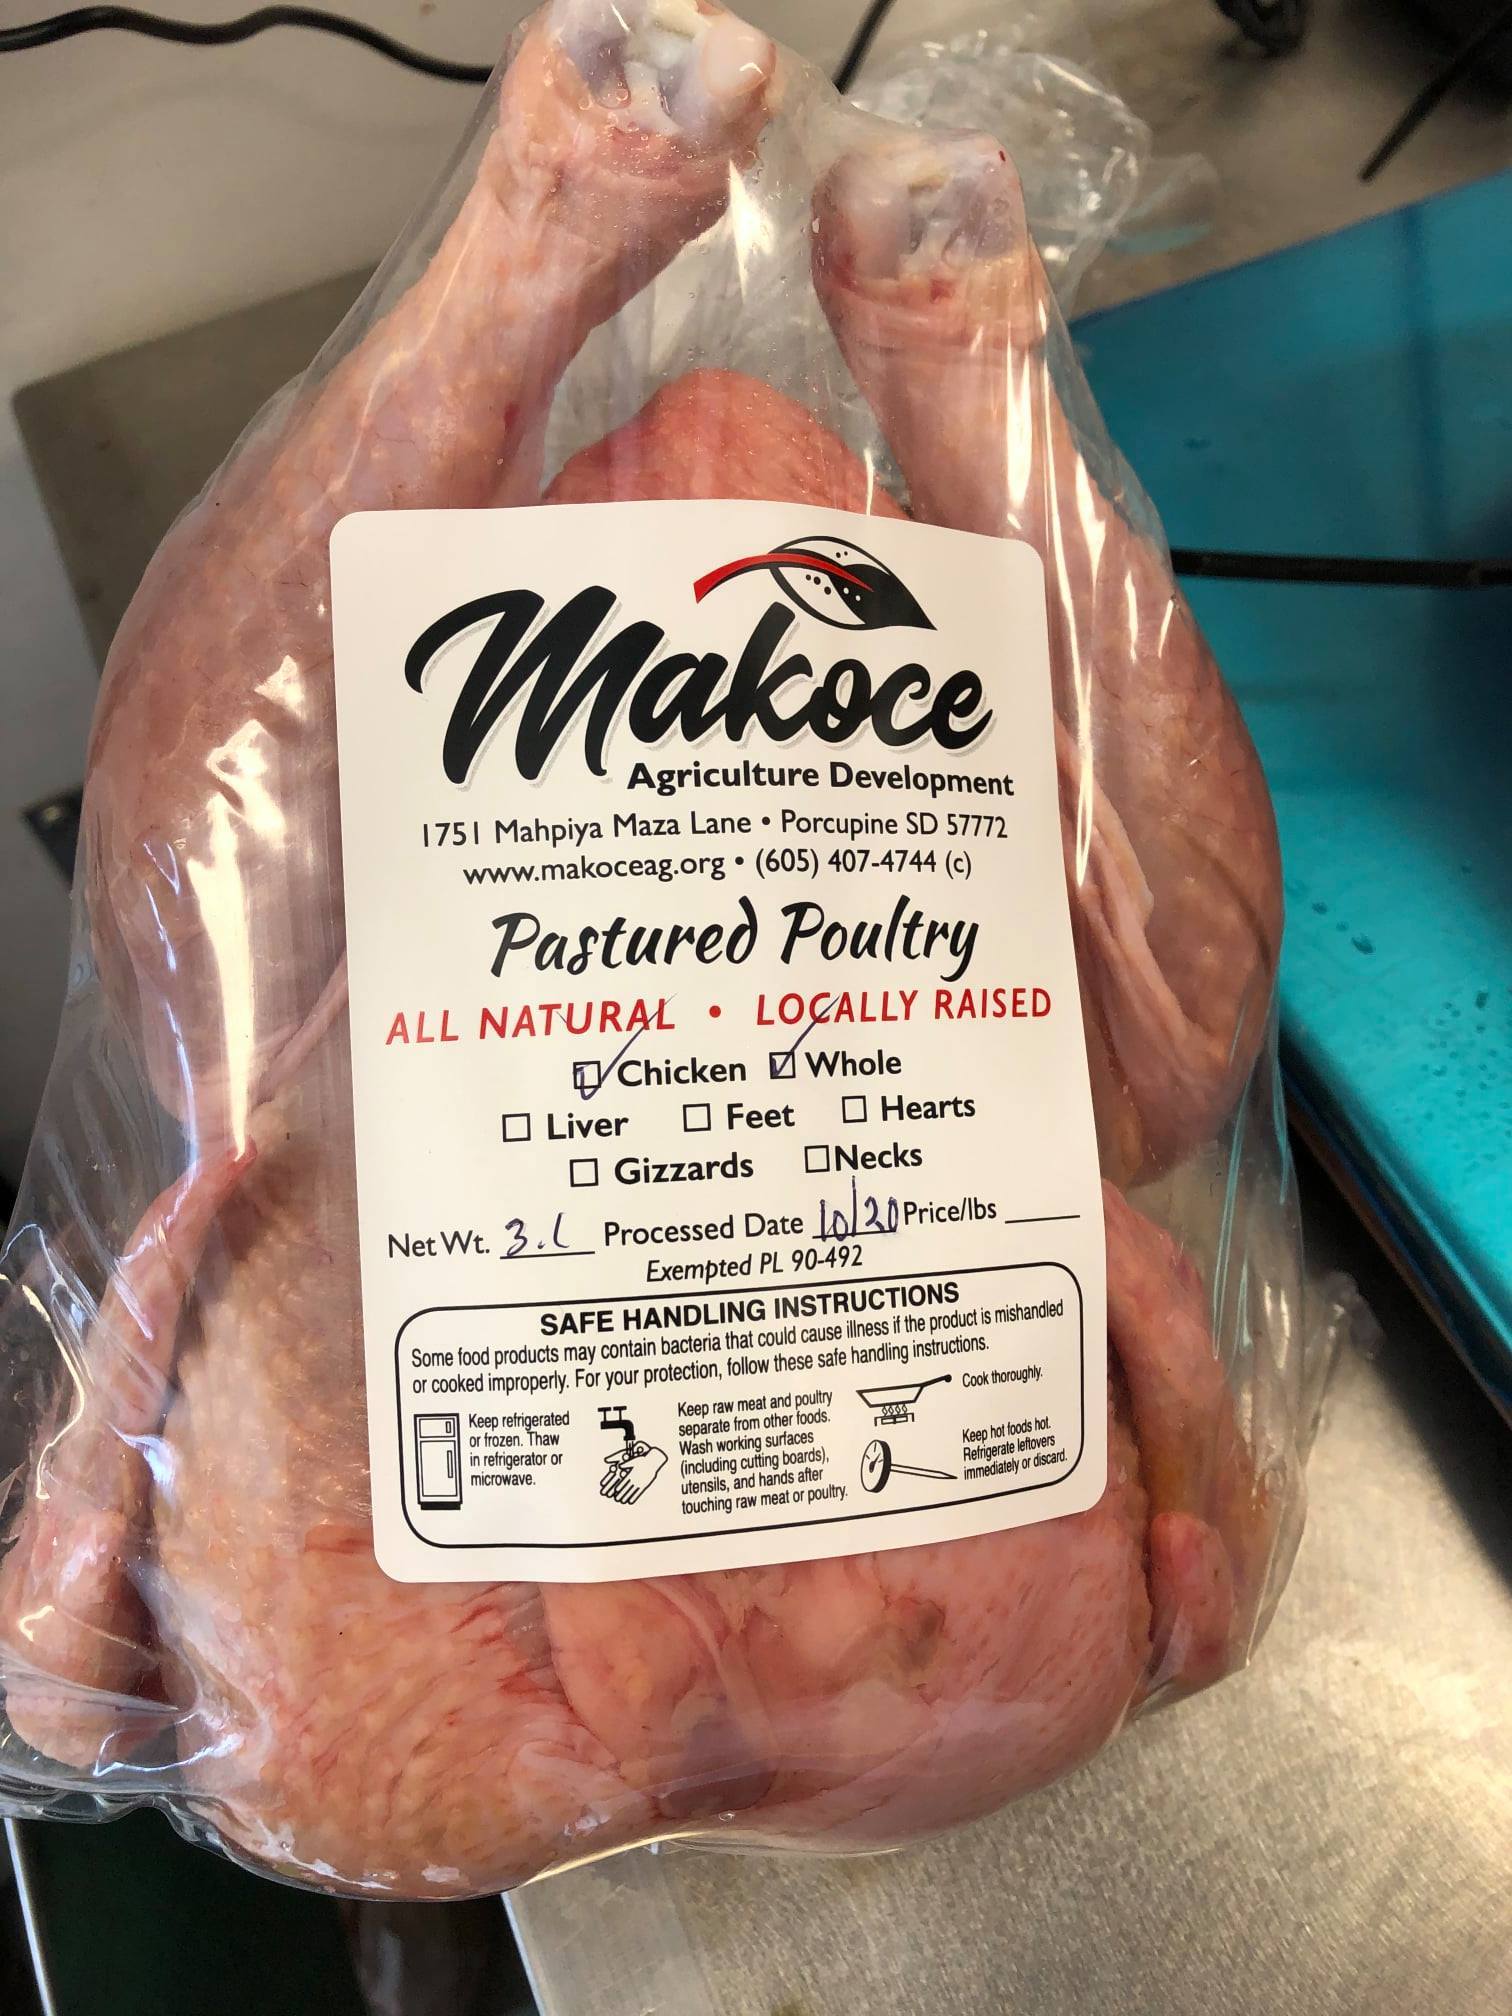 A whole locally raised chicken produced by Makoce Agriculture Development. March 2021